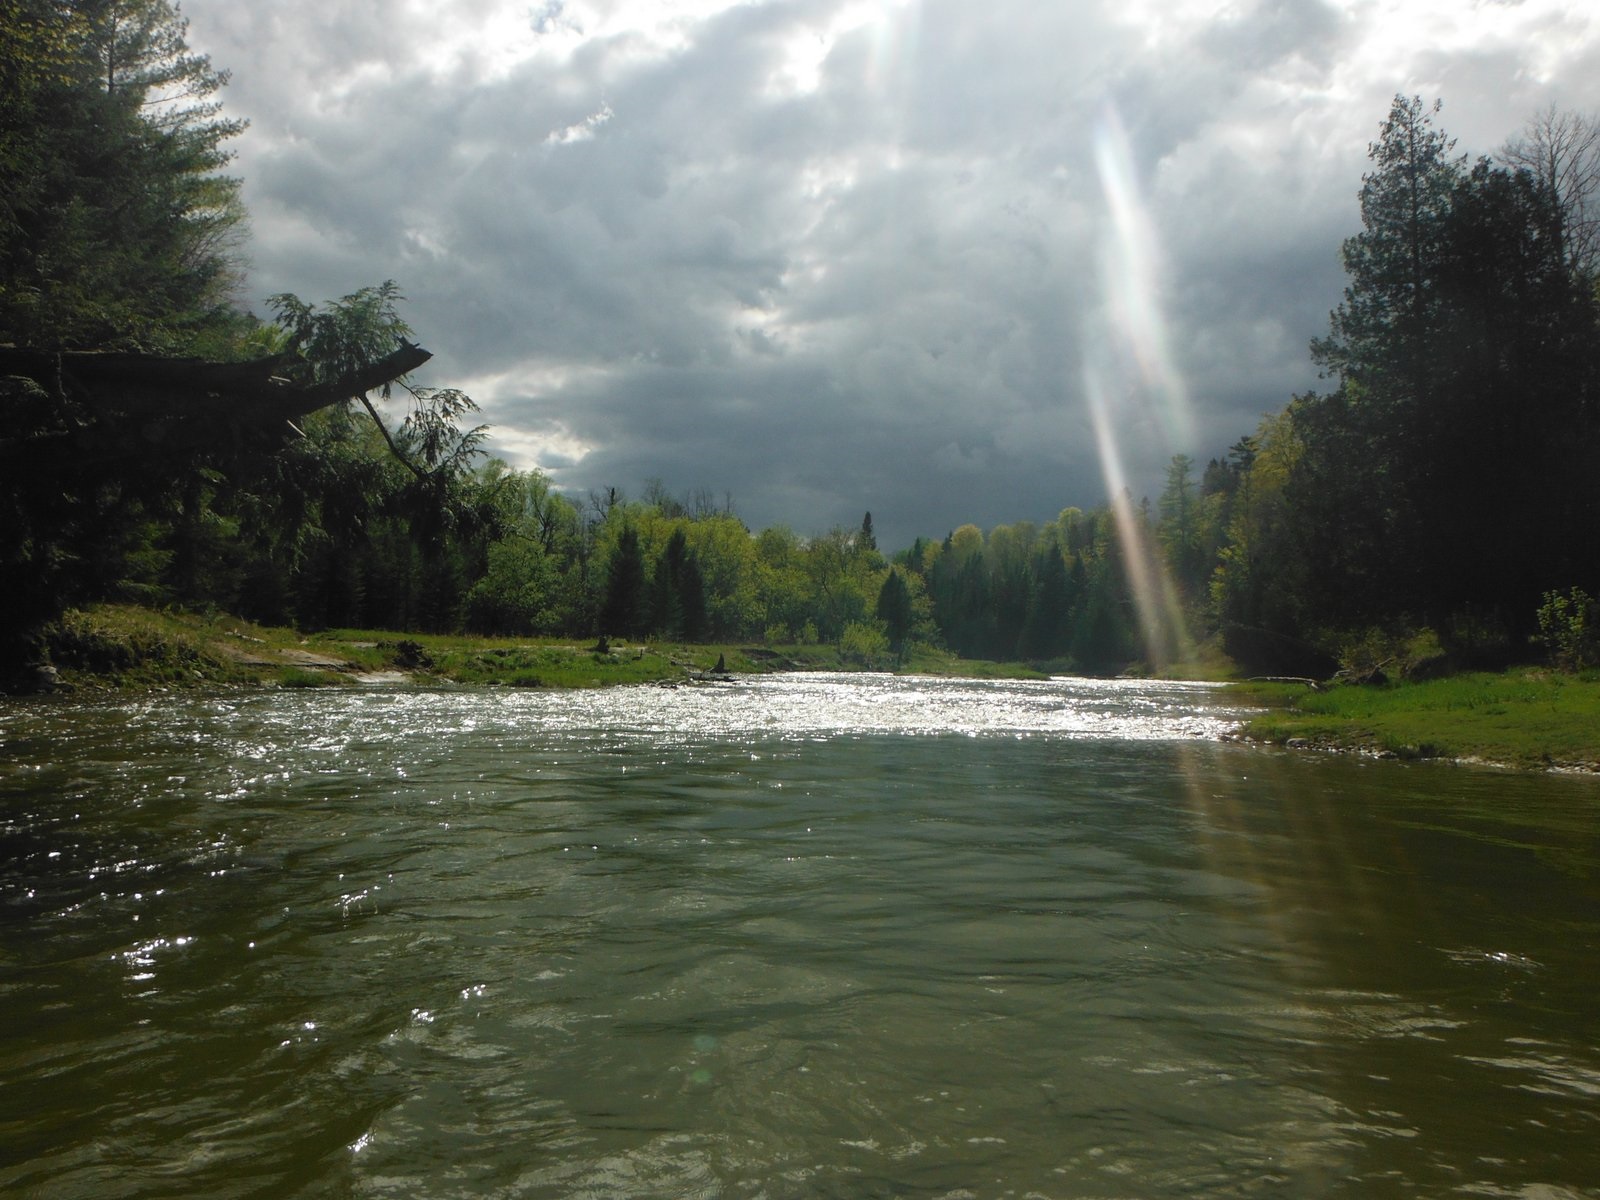 Middle Reaches of the Nottawasaga River